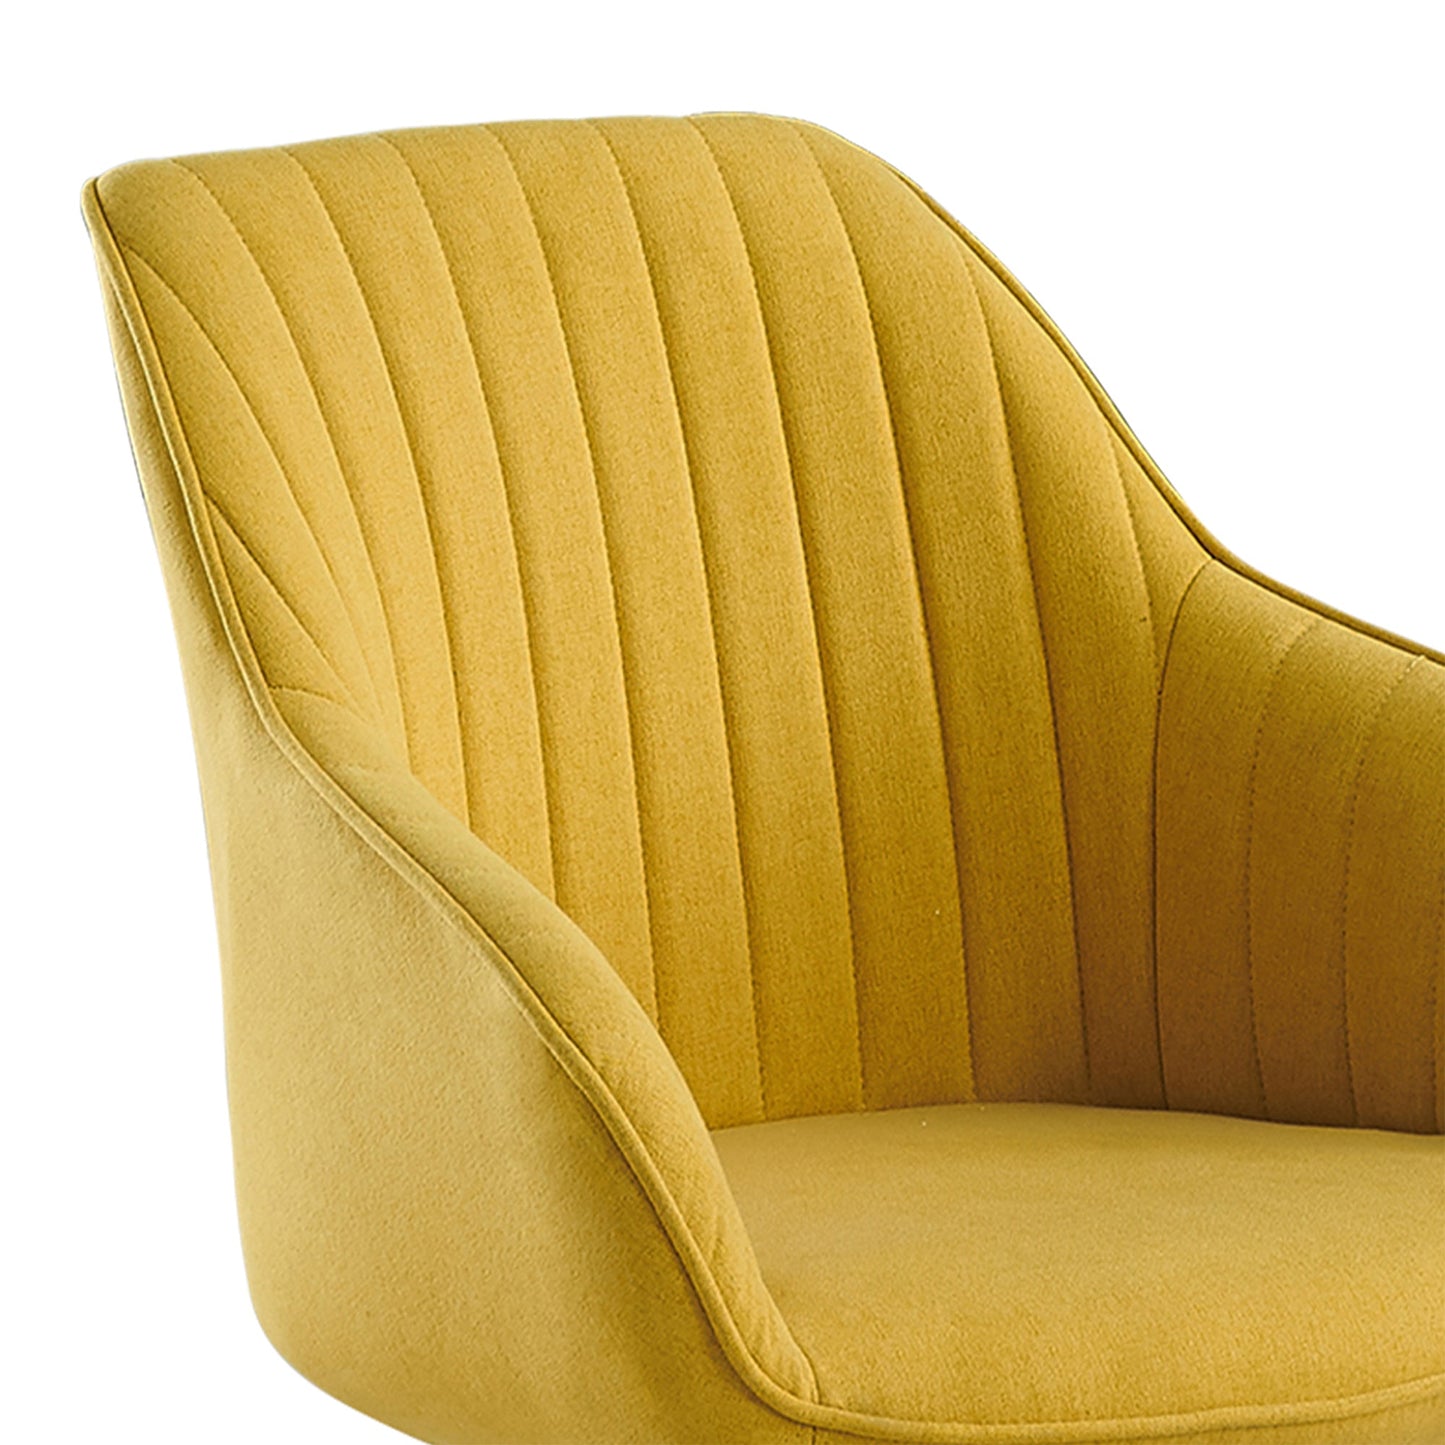 Mid Century Modern Fabric Upholstered Swivel Dining Room Chair with Wood Legs, Leisure Side Chair with Arms for Living Room, Yellow